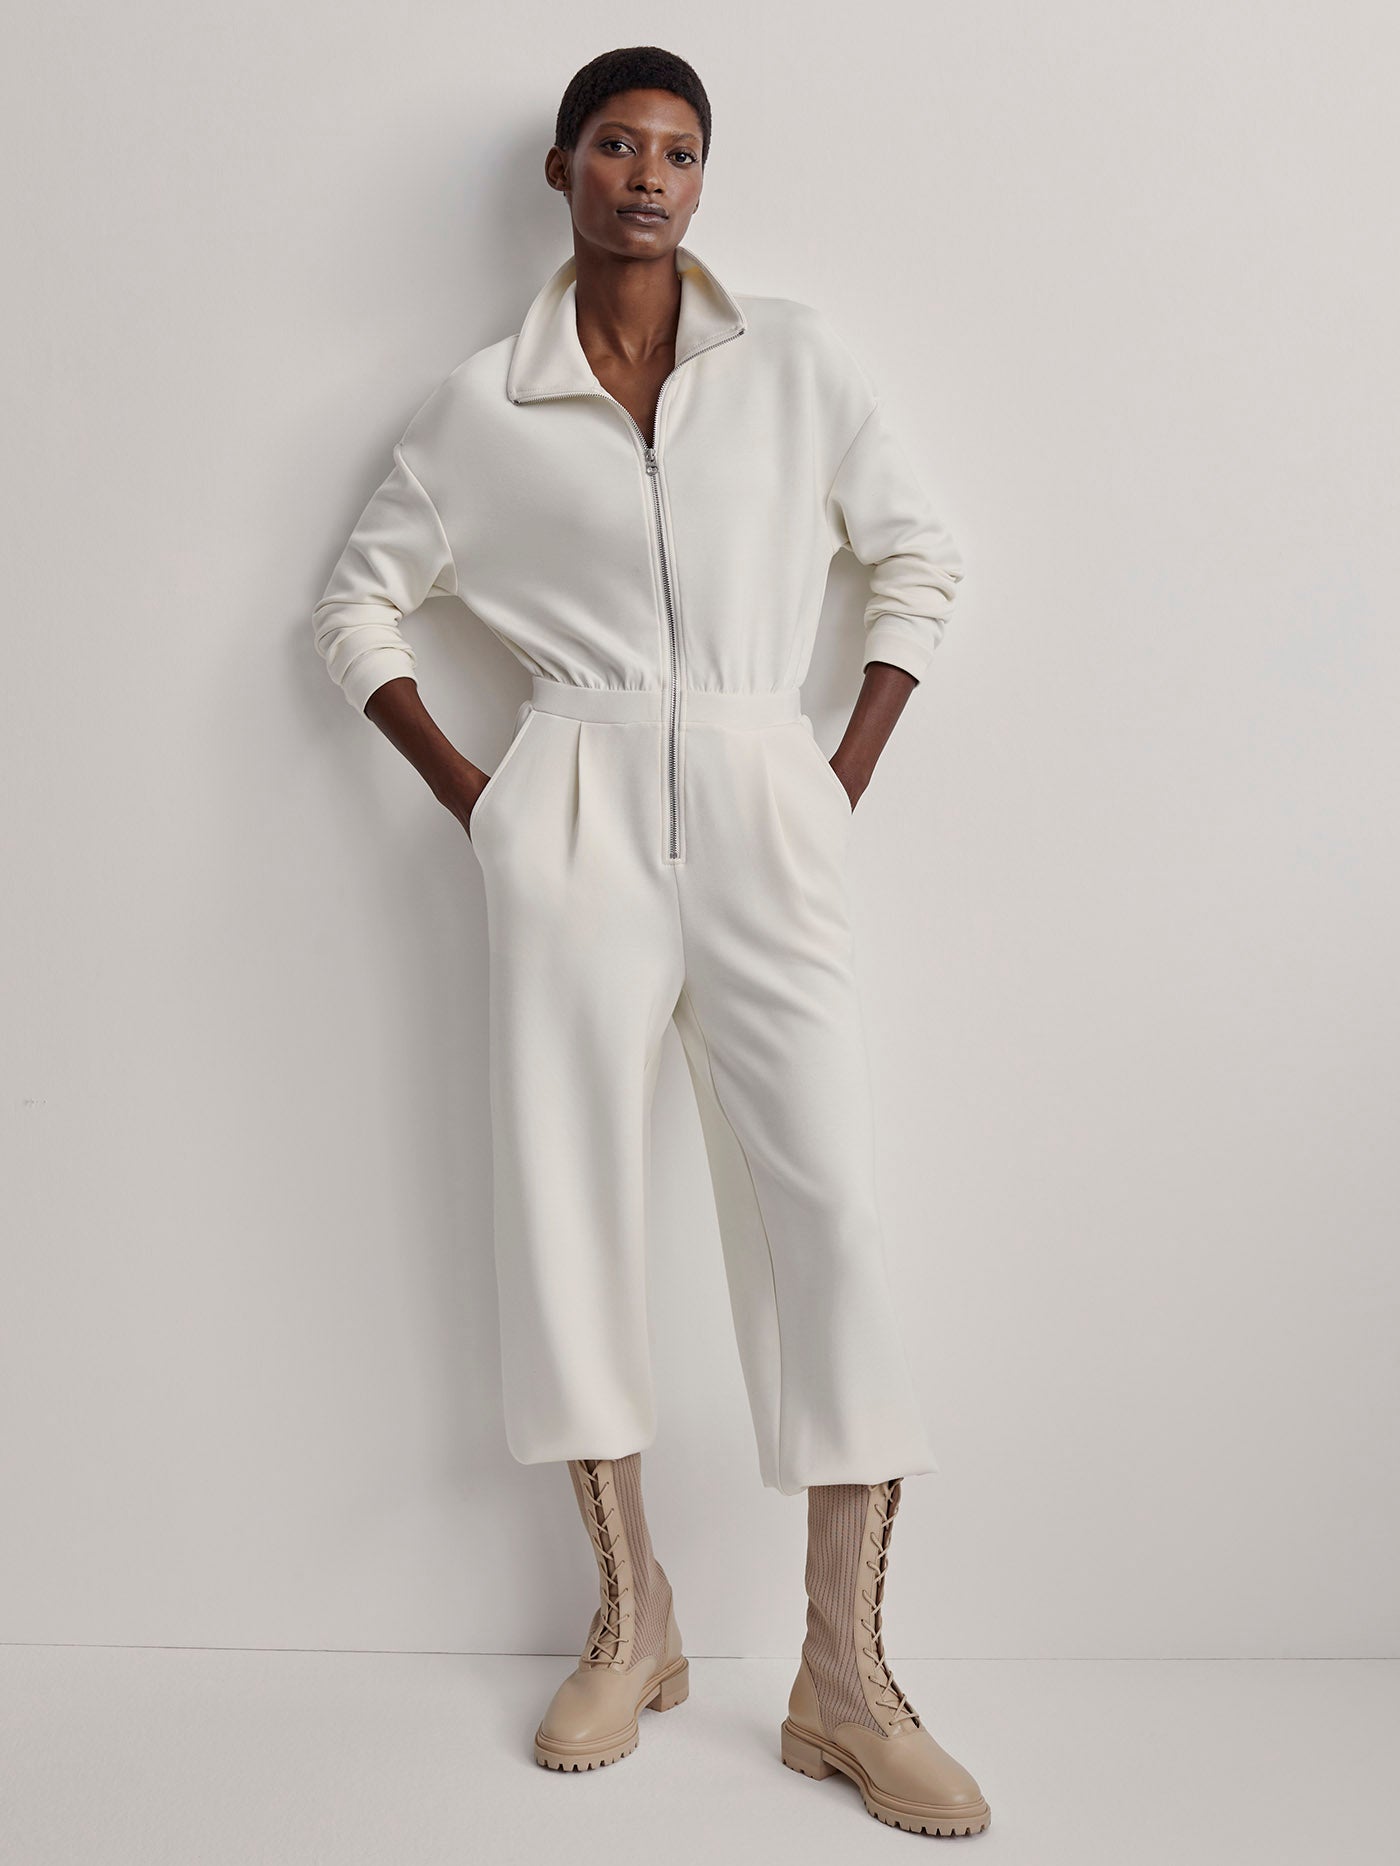 ZARA OYSTER WHITE COLLARED V-NECK LONG SLEEVES JUMPSUIT WITH BUCKLE BELT  SIZE S | eBay